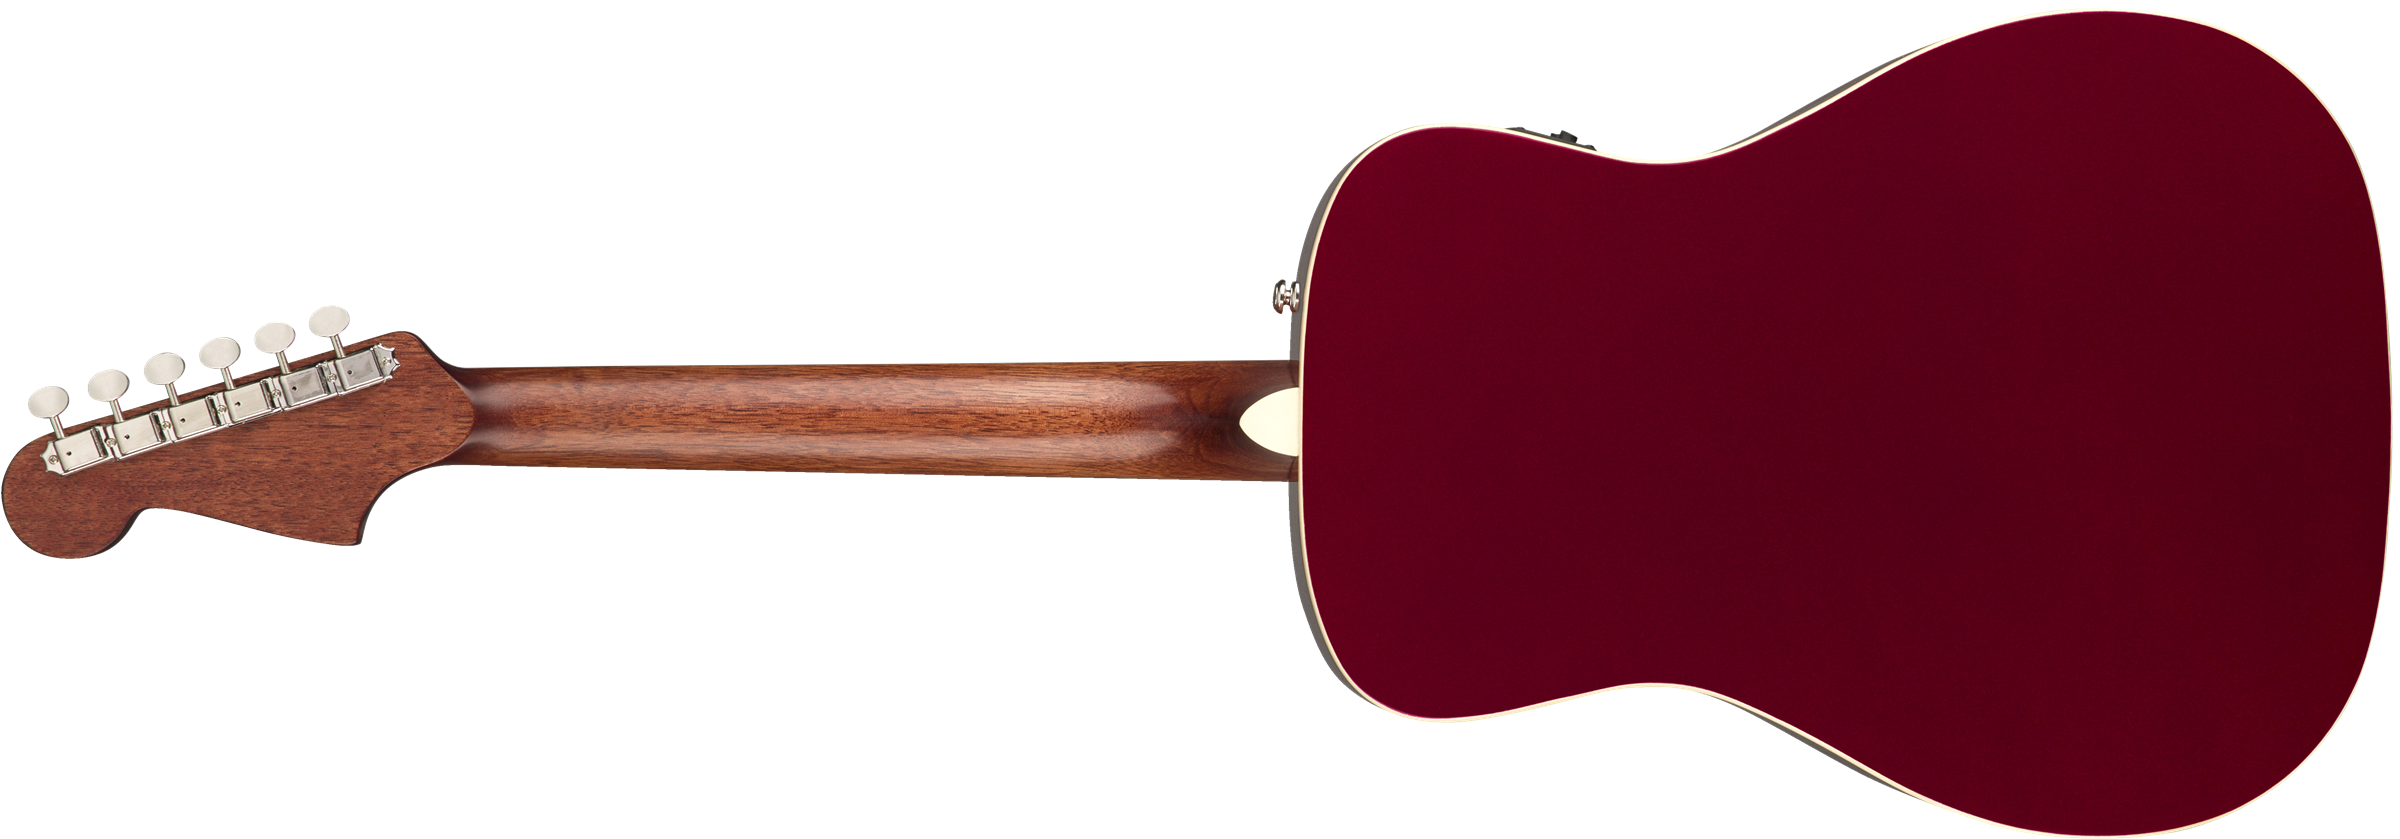 Fender Malibu Player - Candy Apple Red - Acoustic guitar & electro - Variation 6